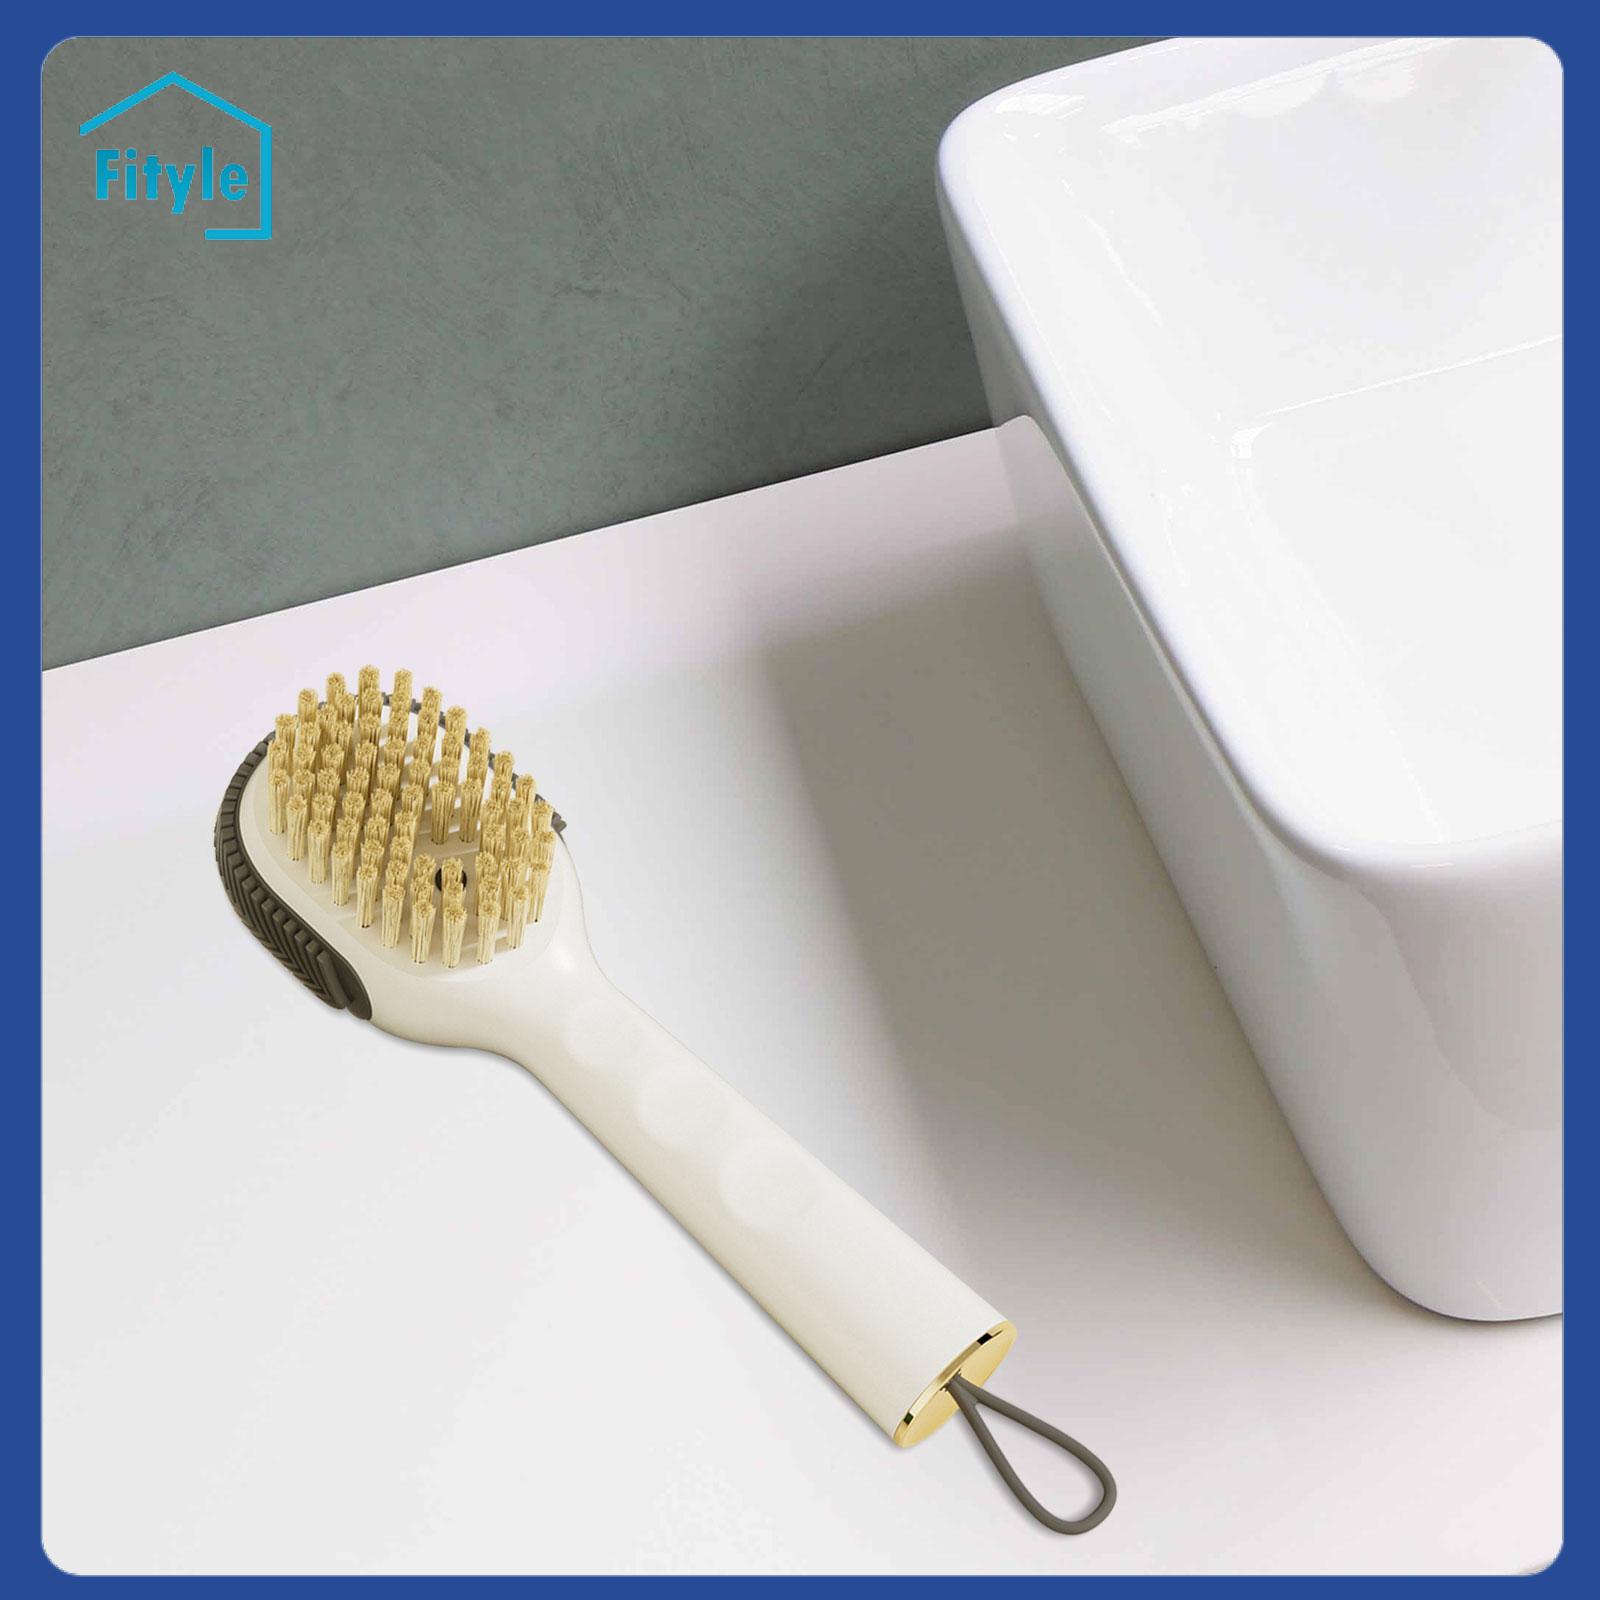 Fityle Household Cleaning Brush Shoe Cleaning Brush